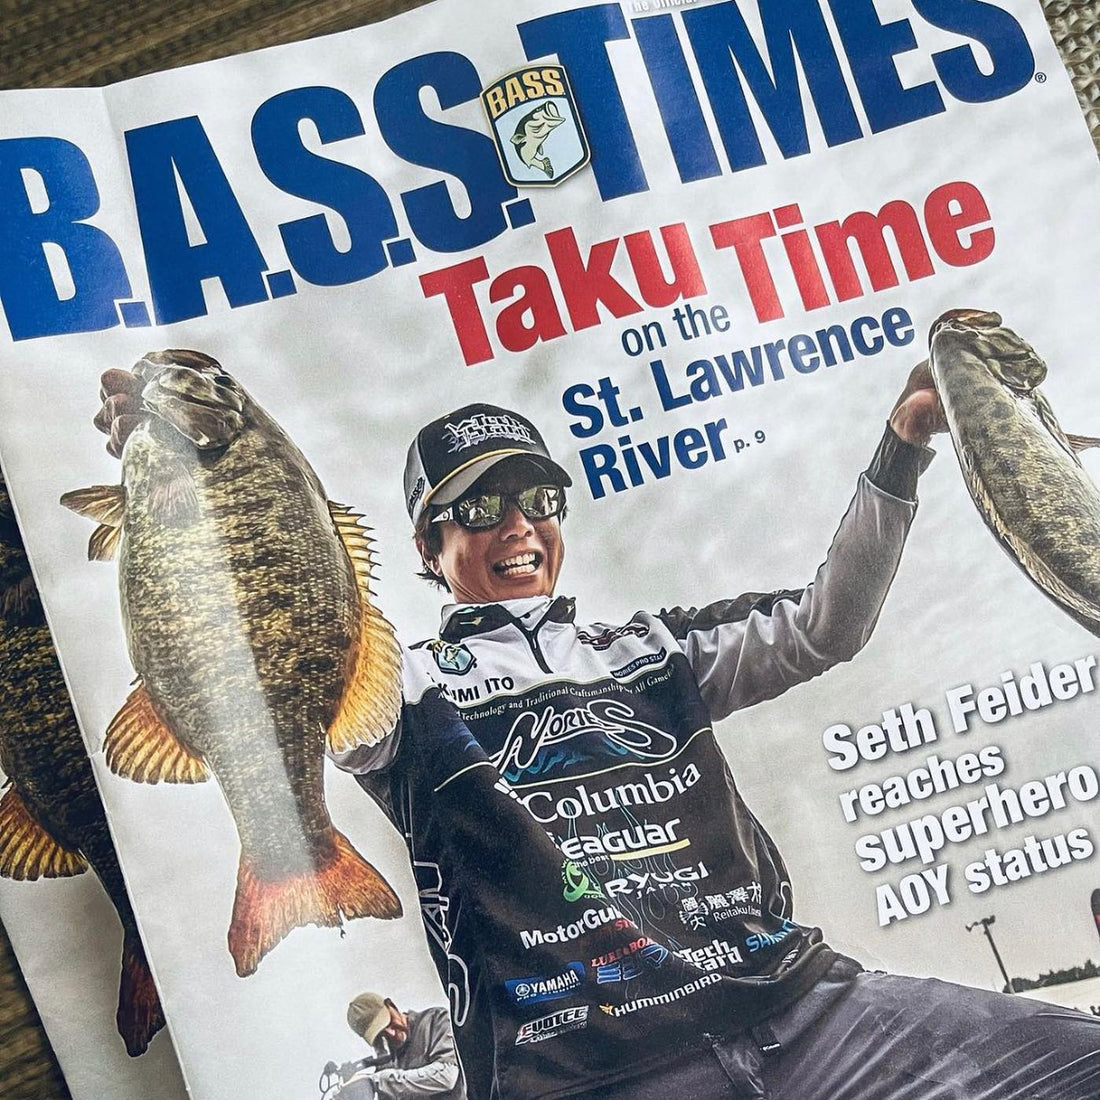 MR. FAT BASS himself TAKU ITO graces the front page of BASS TIMES